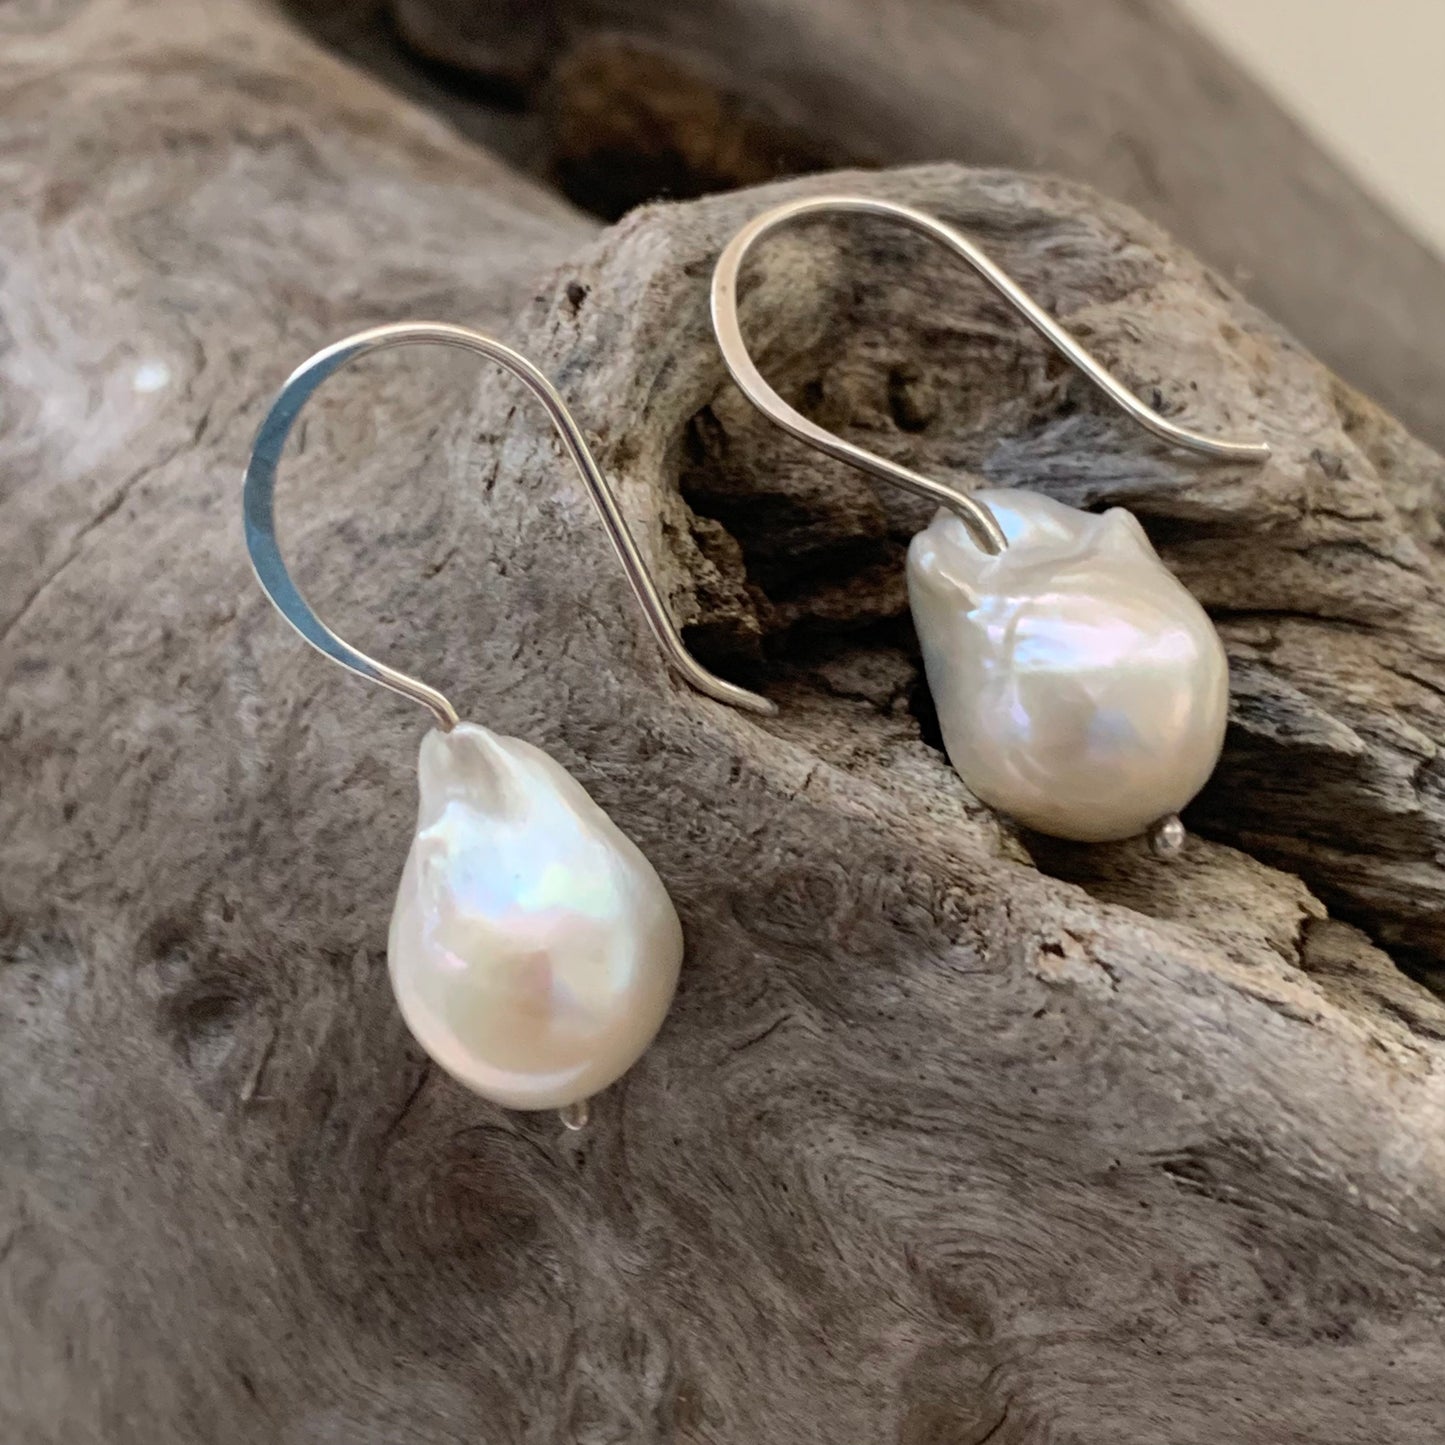 Small pearl earrings - freshwater baroque pearls - pearl drop earrings with sterling ear wires - simple pearl jewelry - handmade - for her